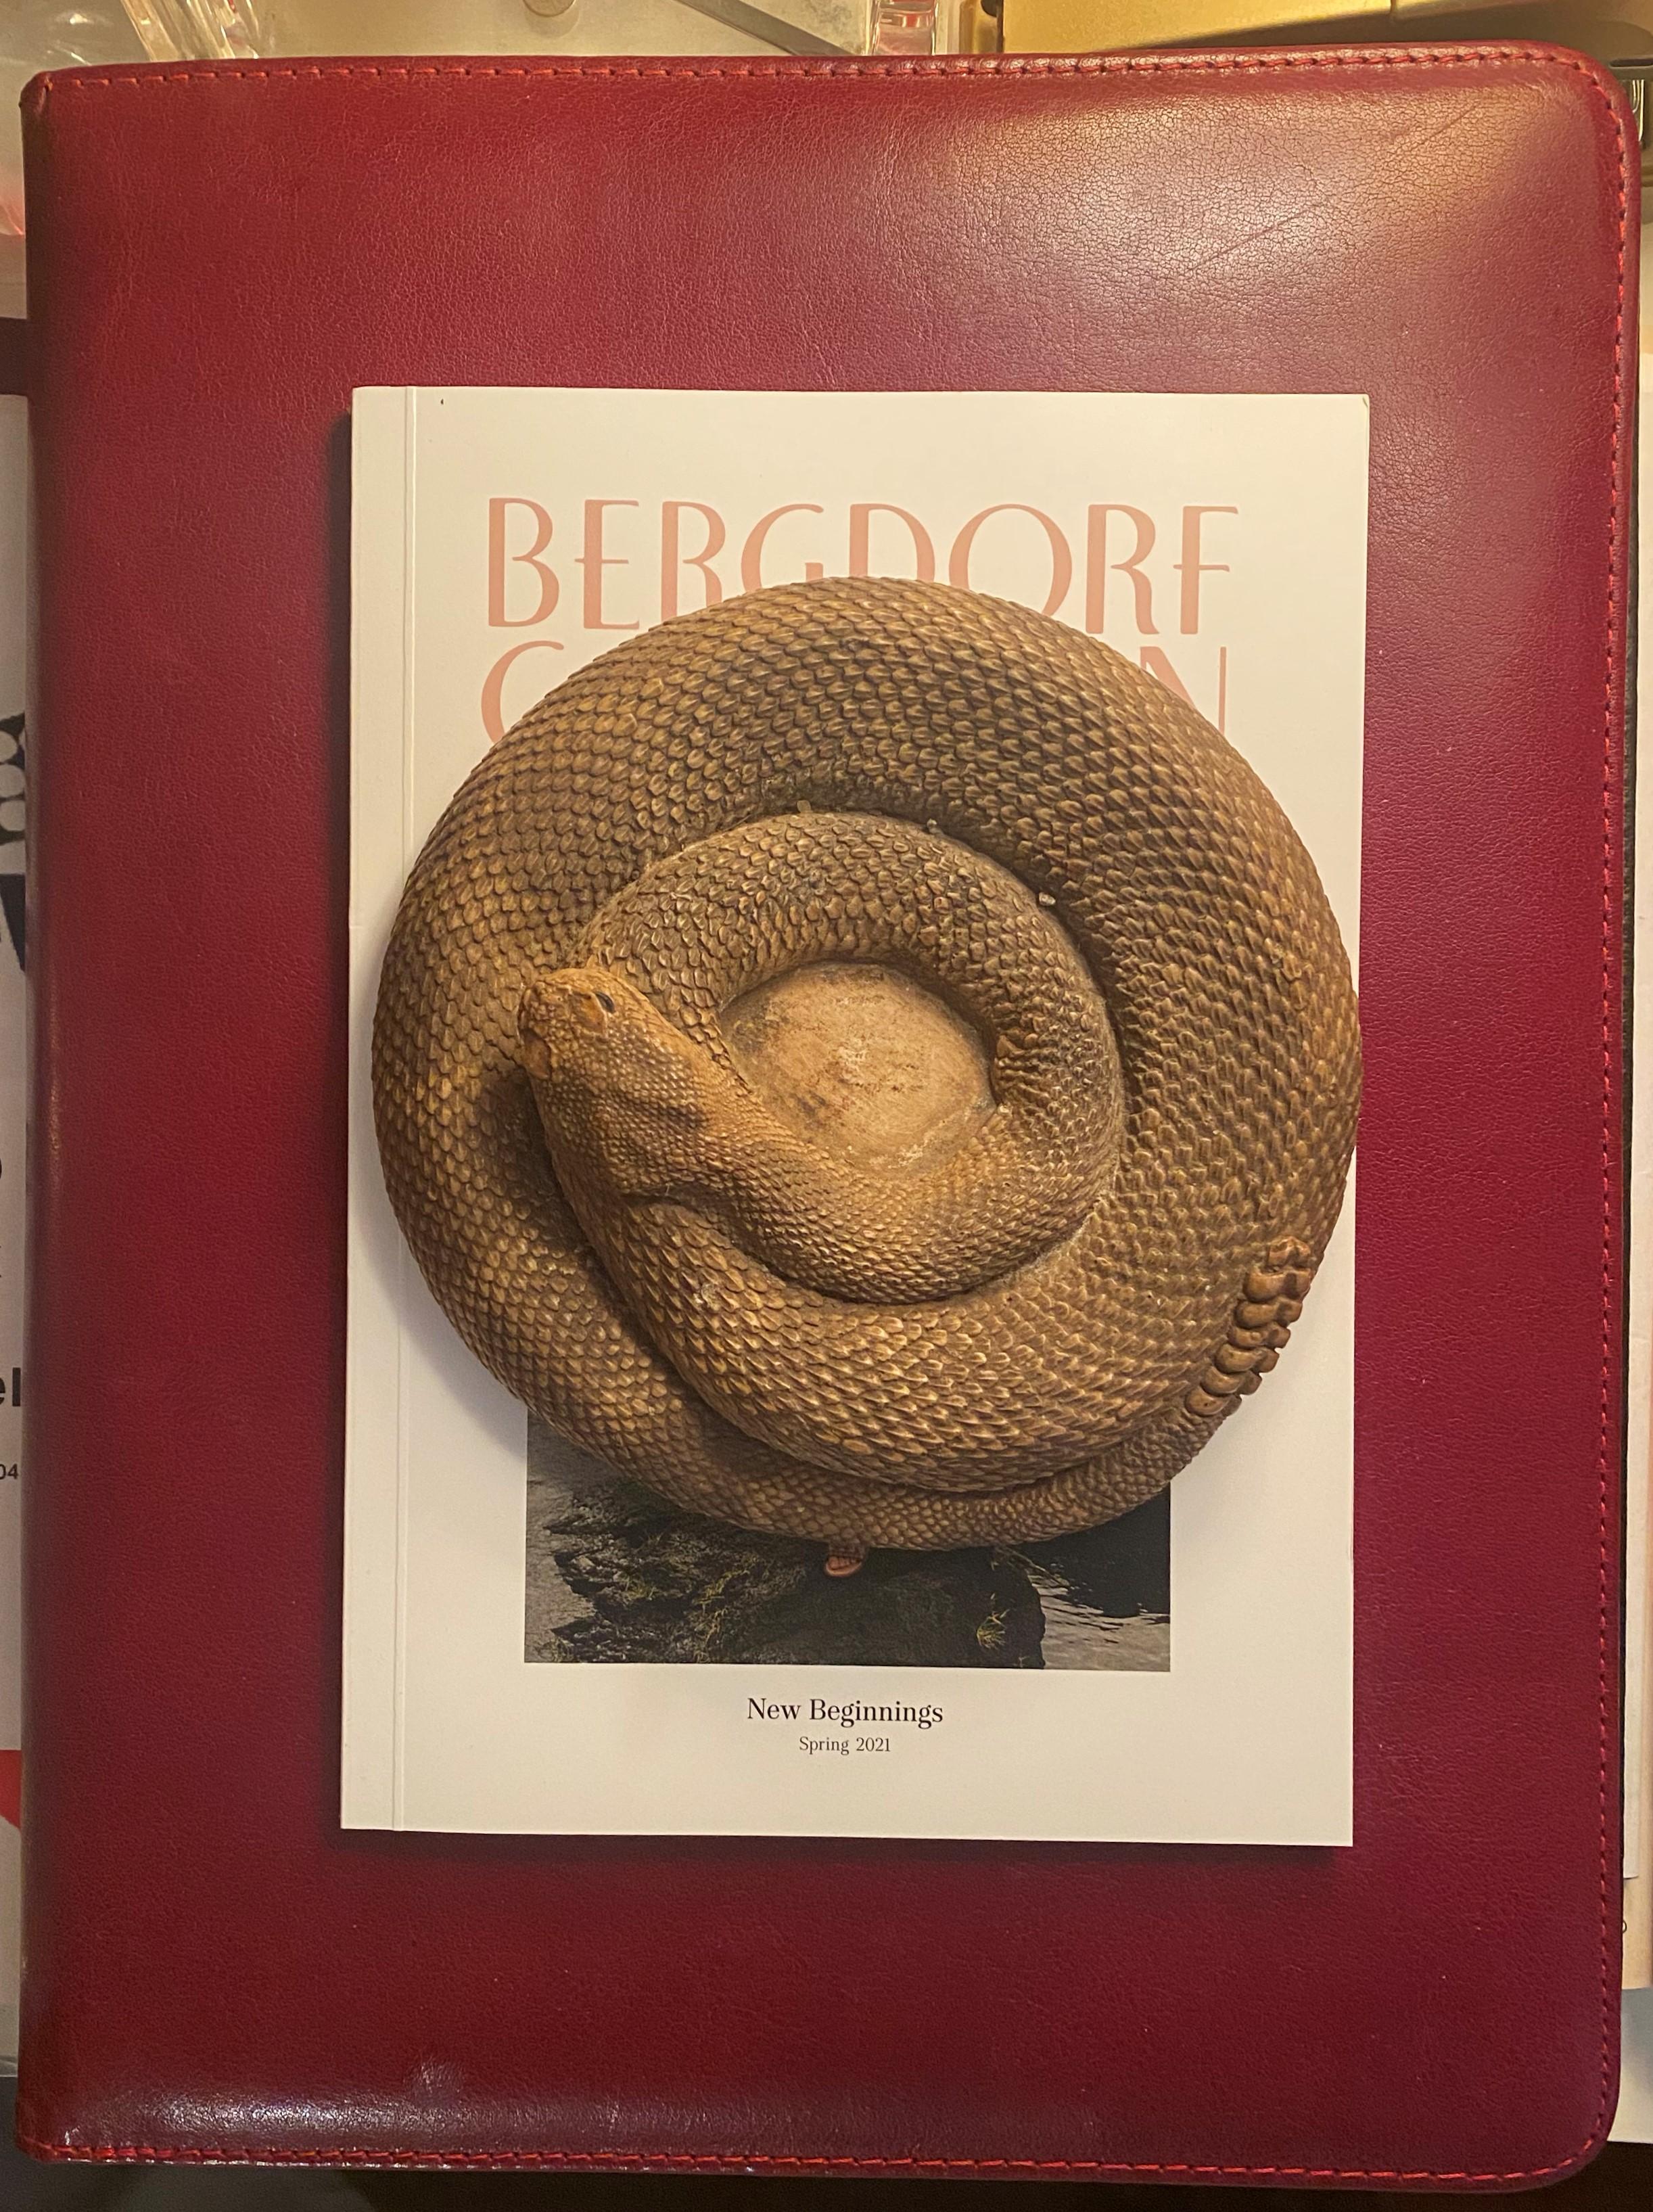 Rustic Coiled Rattle Snake, circa 1980s USA For Sale